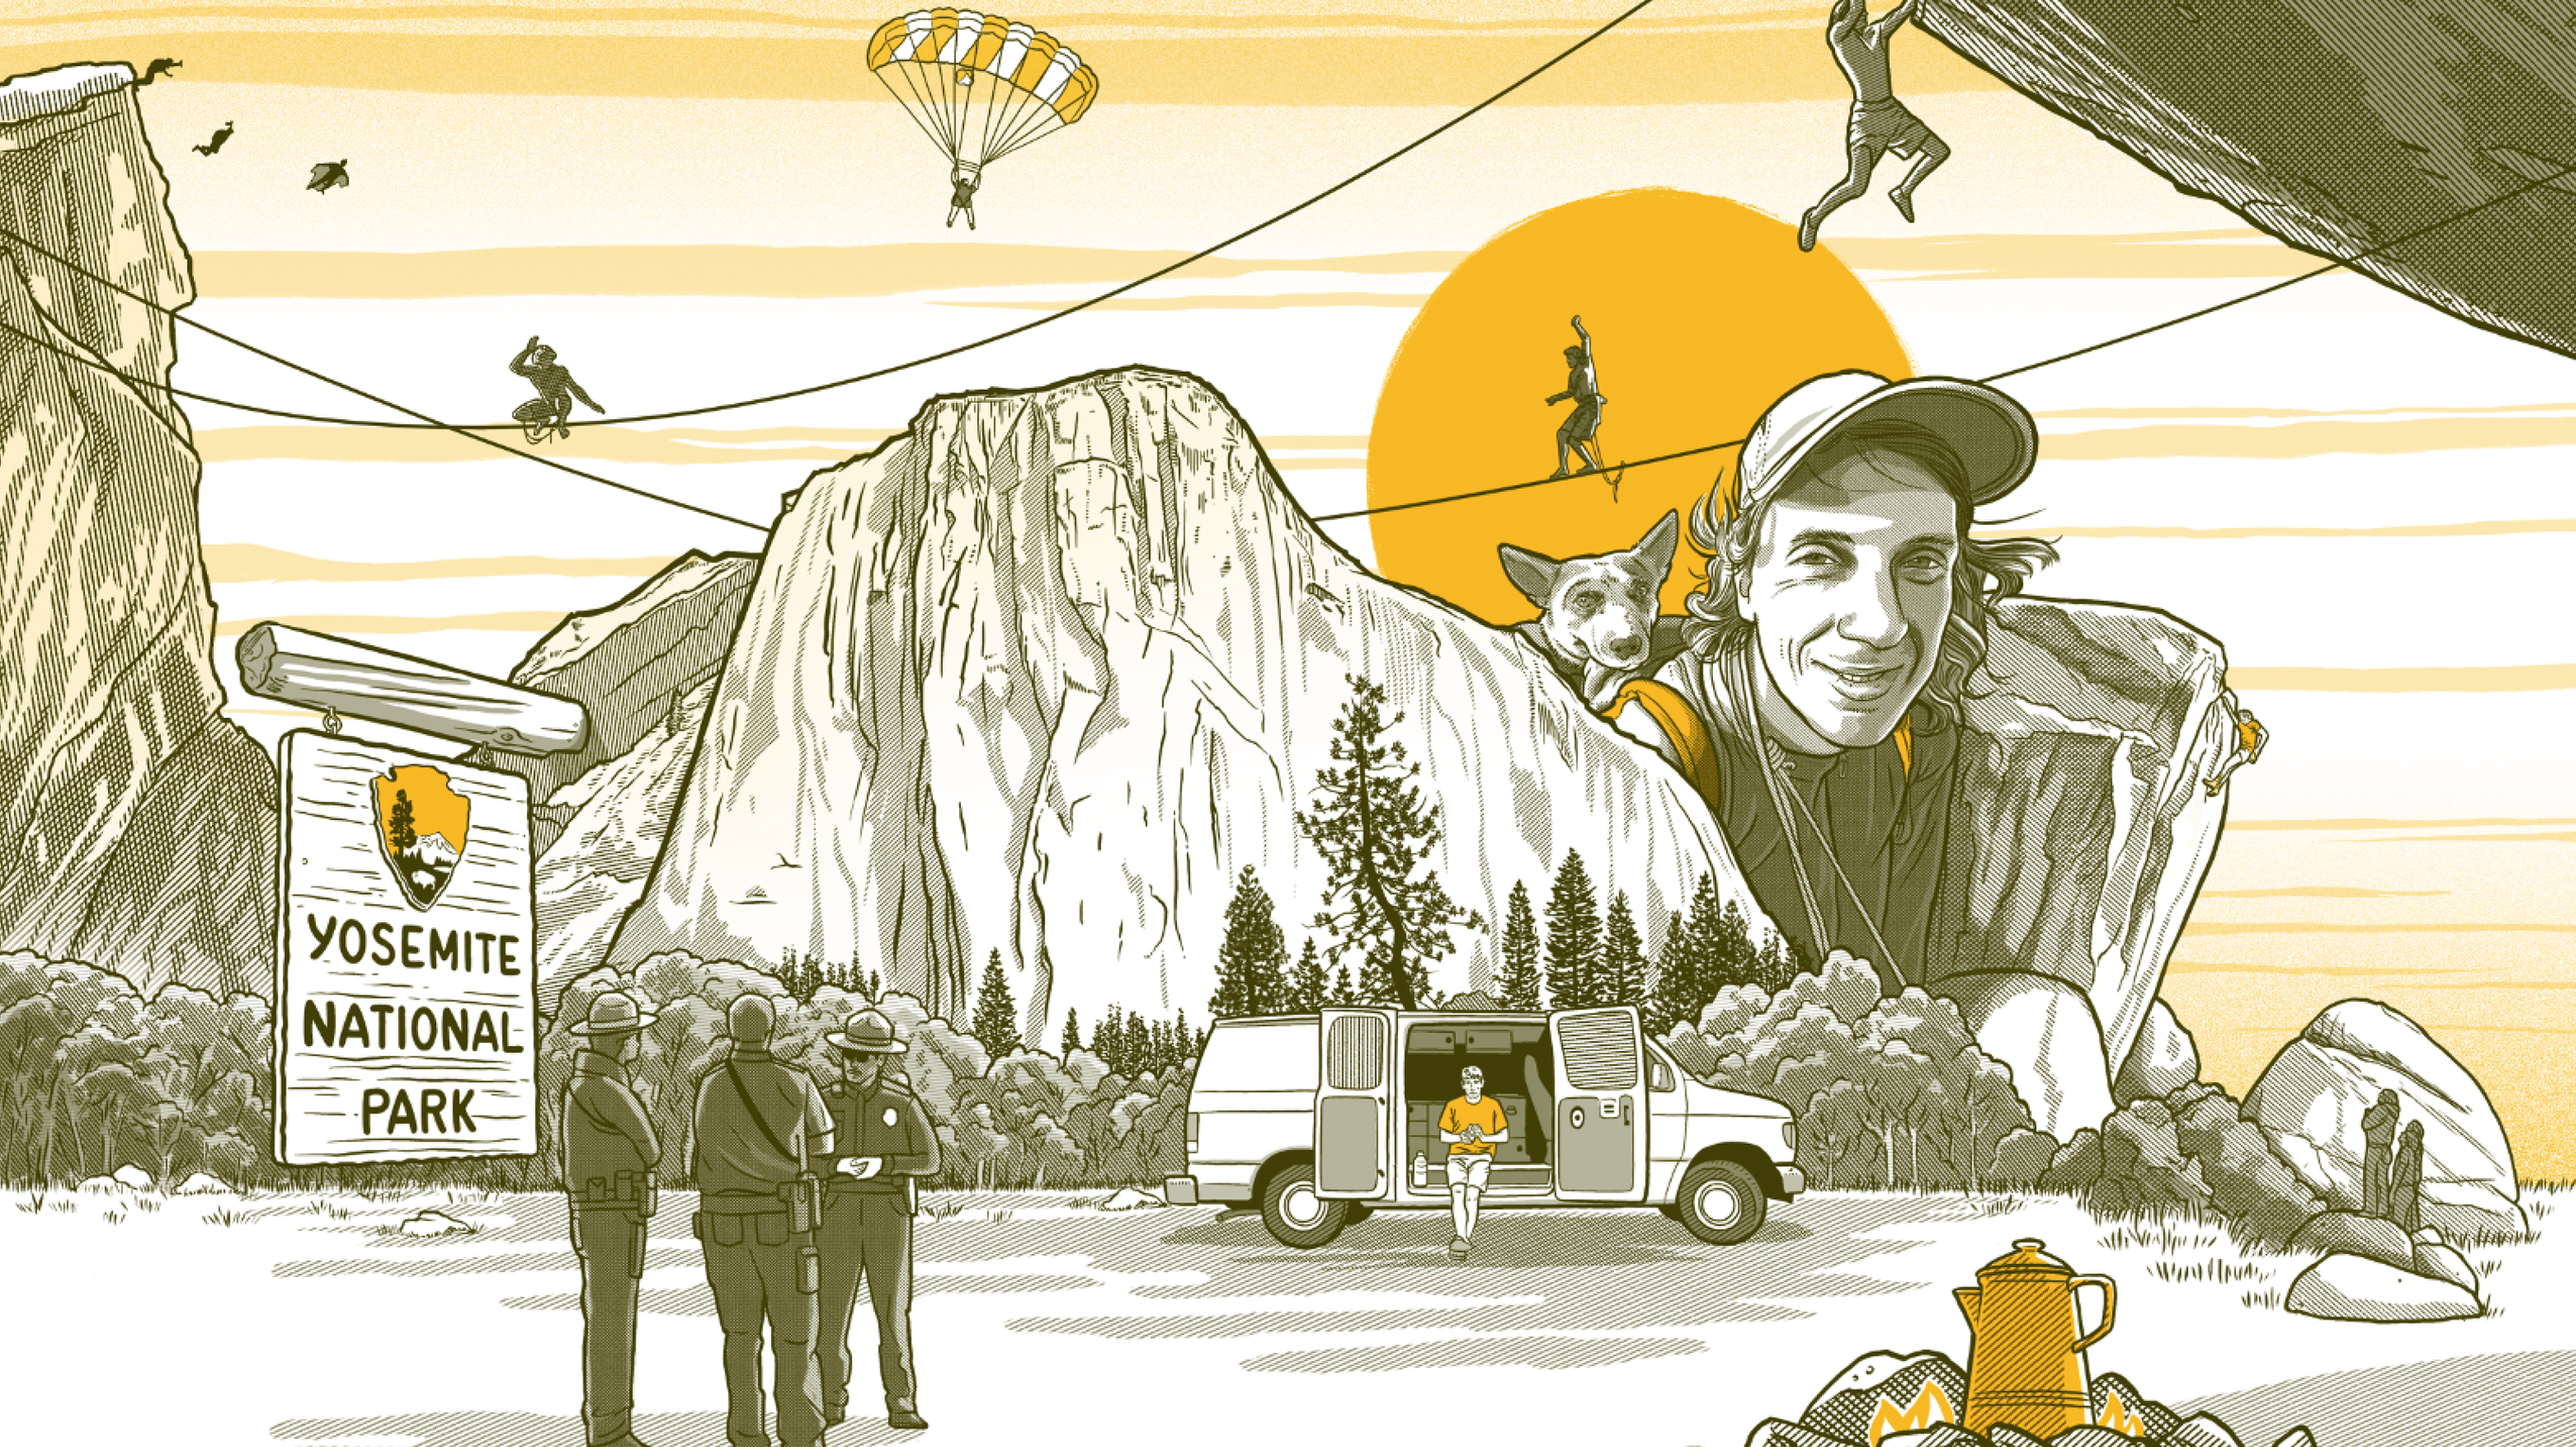 Graphic of Yosemite National Park featuring rock climbers, park rangers, camping.